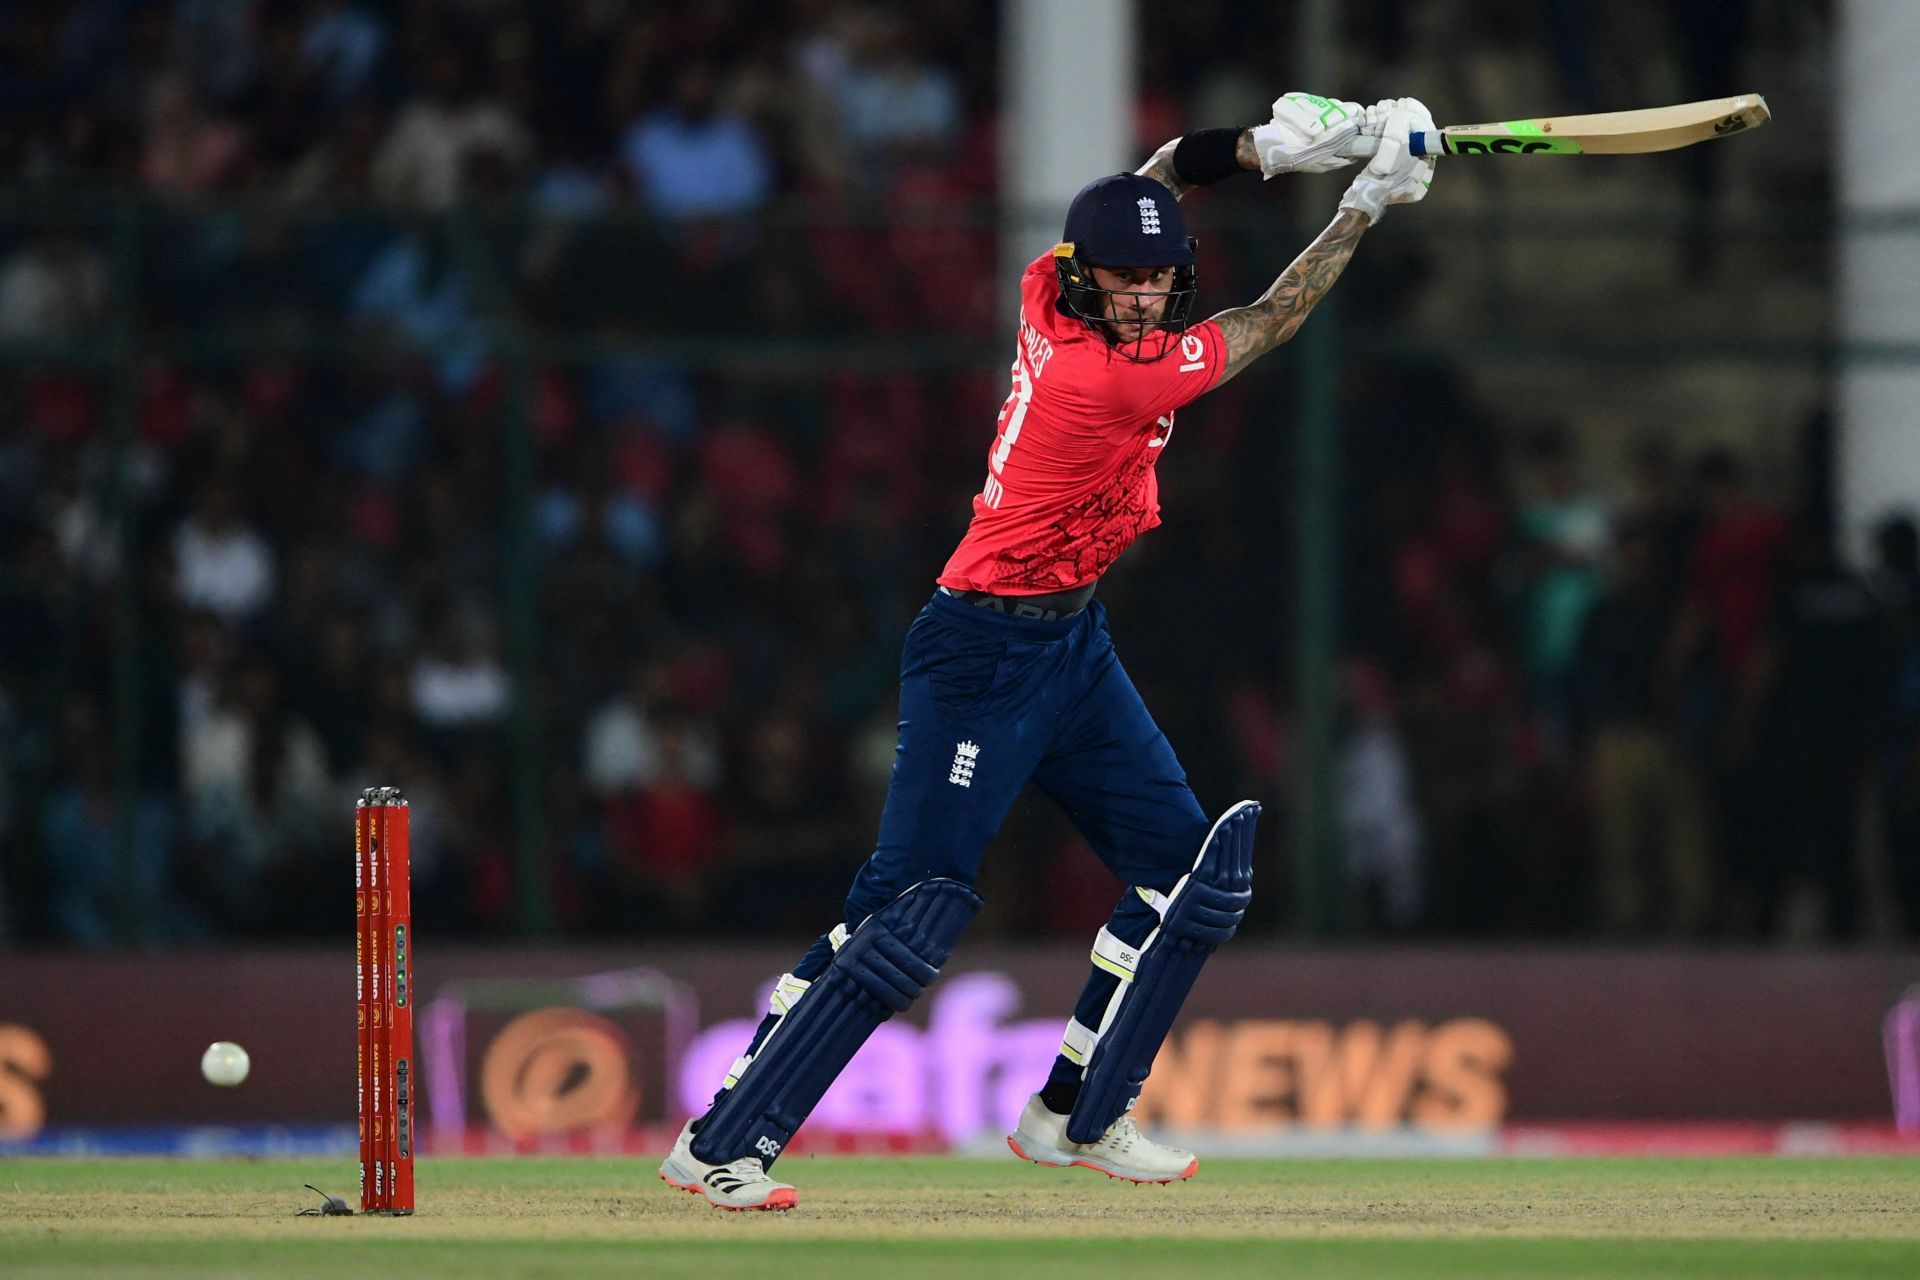 Alex Hales scored a measured fifty against Pakistan in the first T20I. (Credits: Twitter)